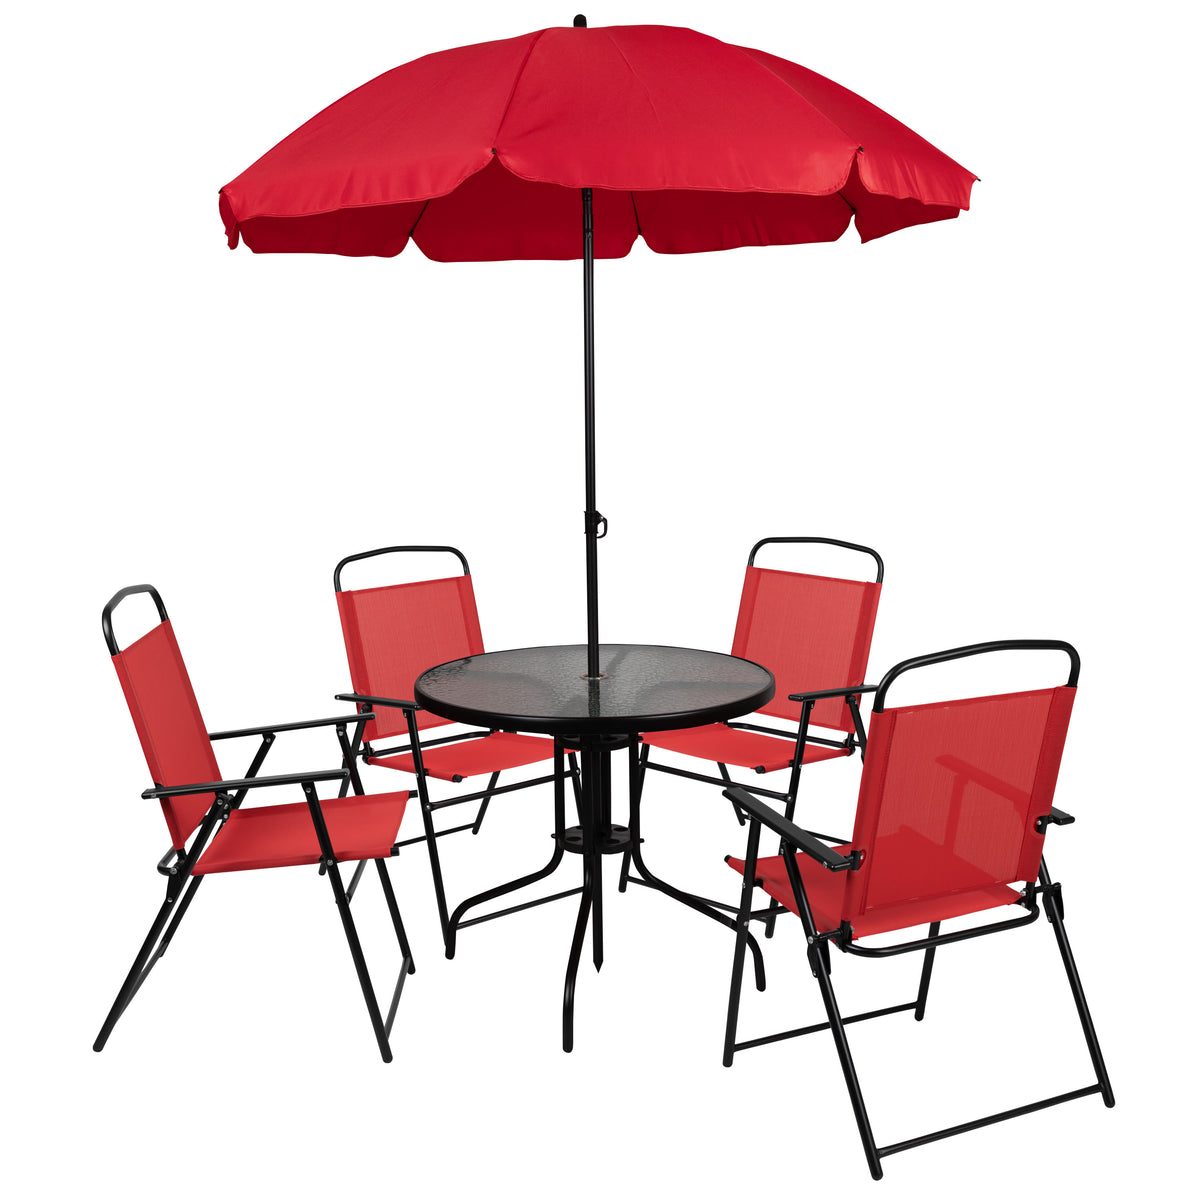 Red |#| 6 Piece Red Patio Garden Set with Umbrella Table and Set of 4 Folding Chairs